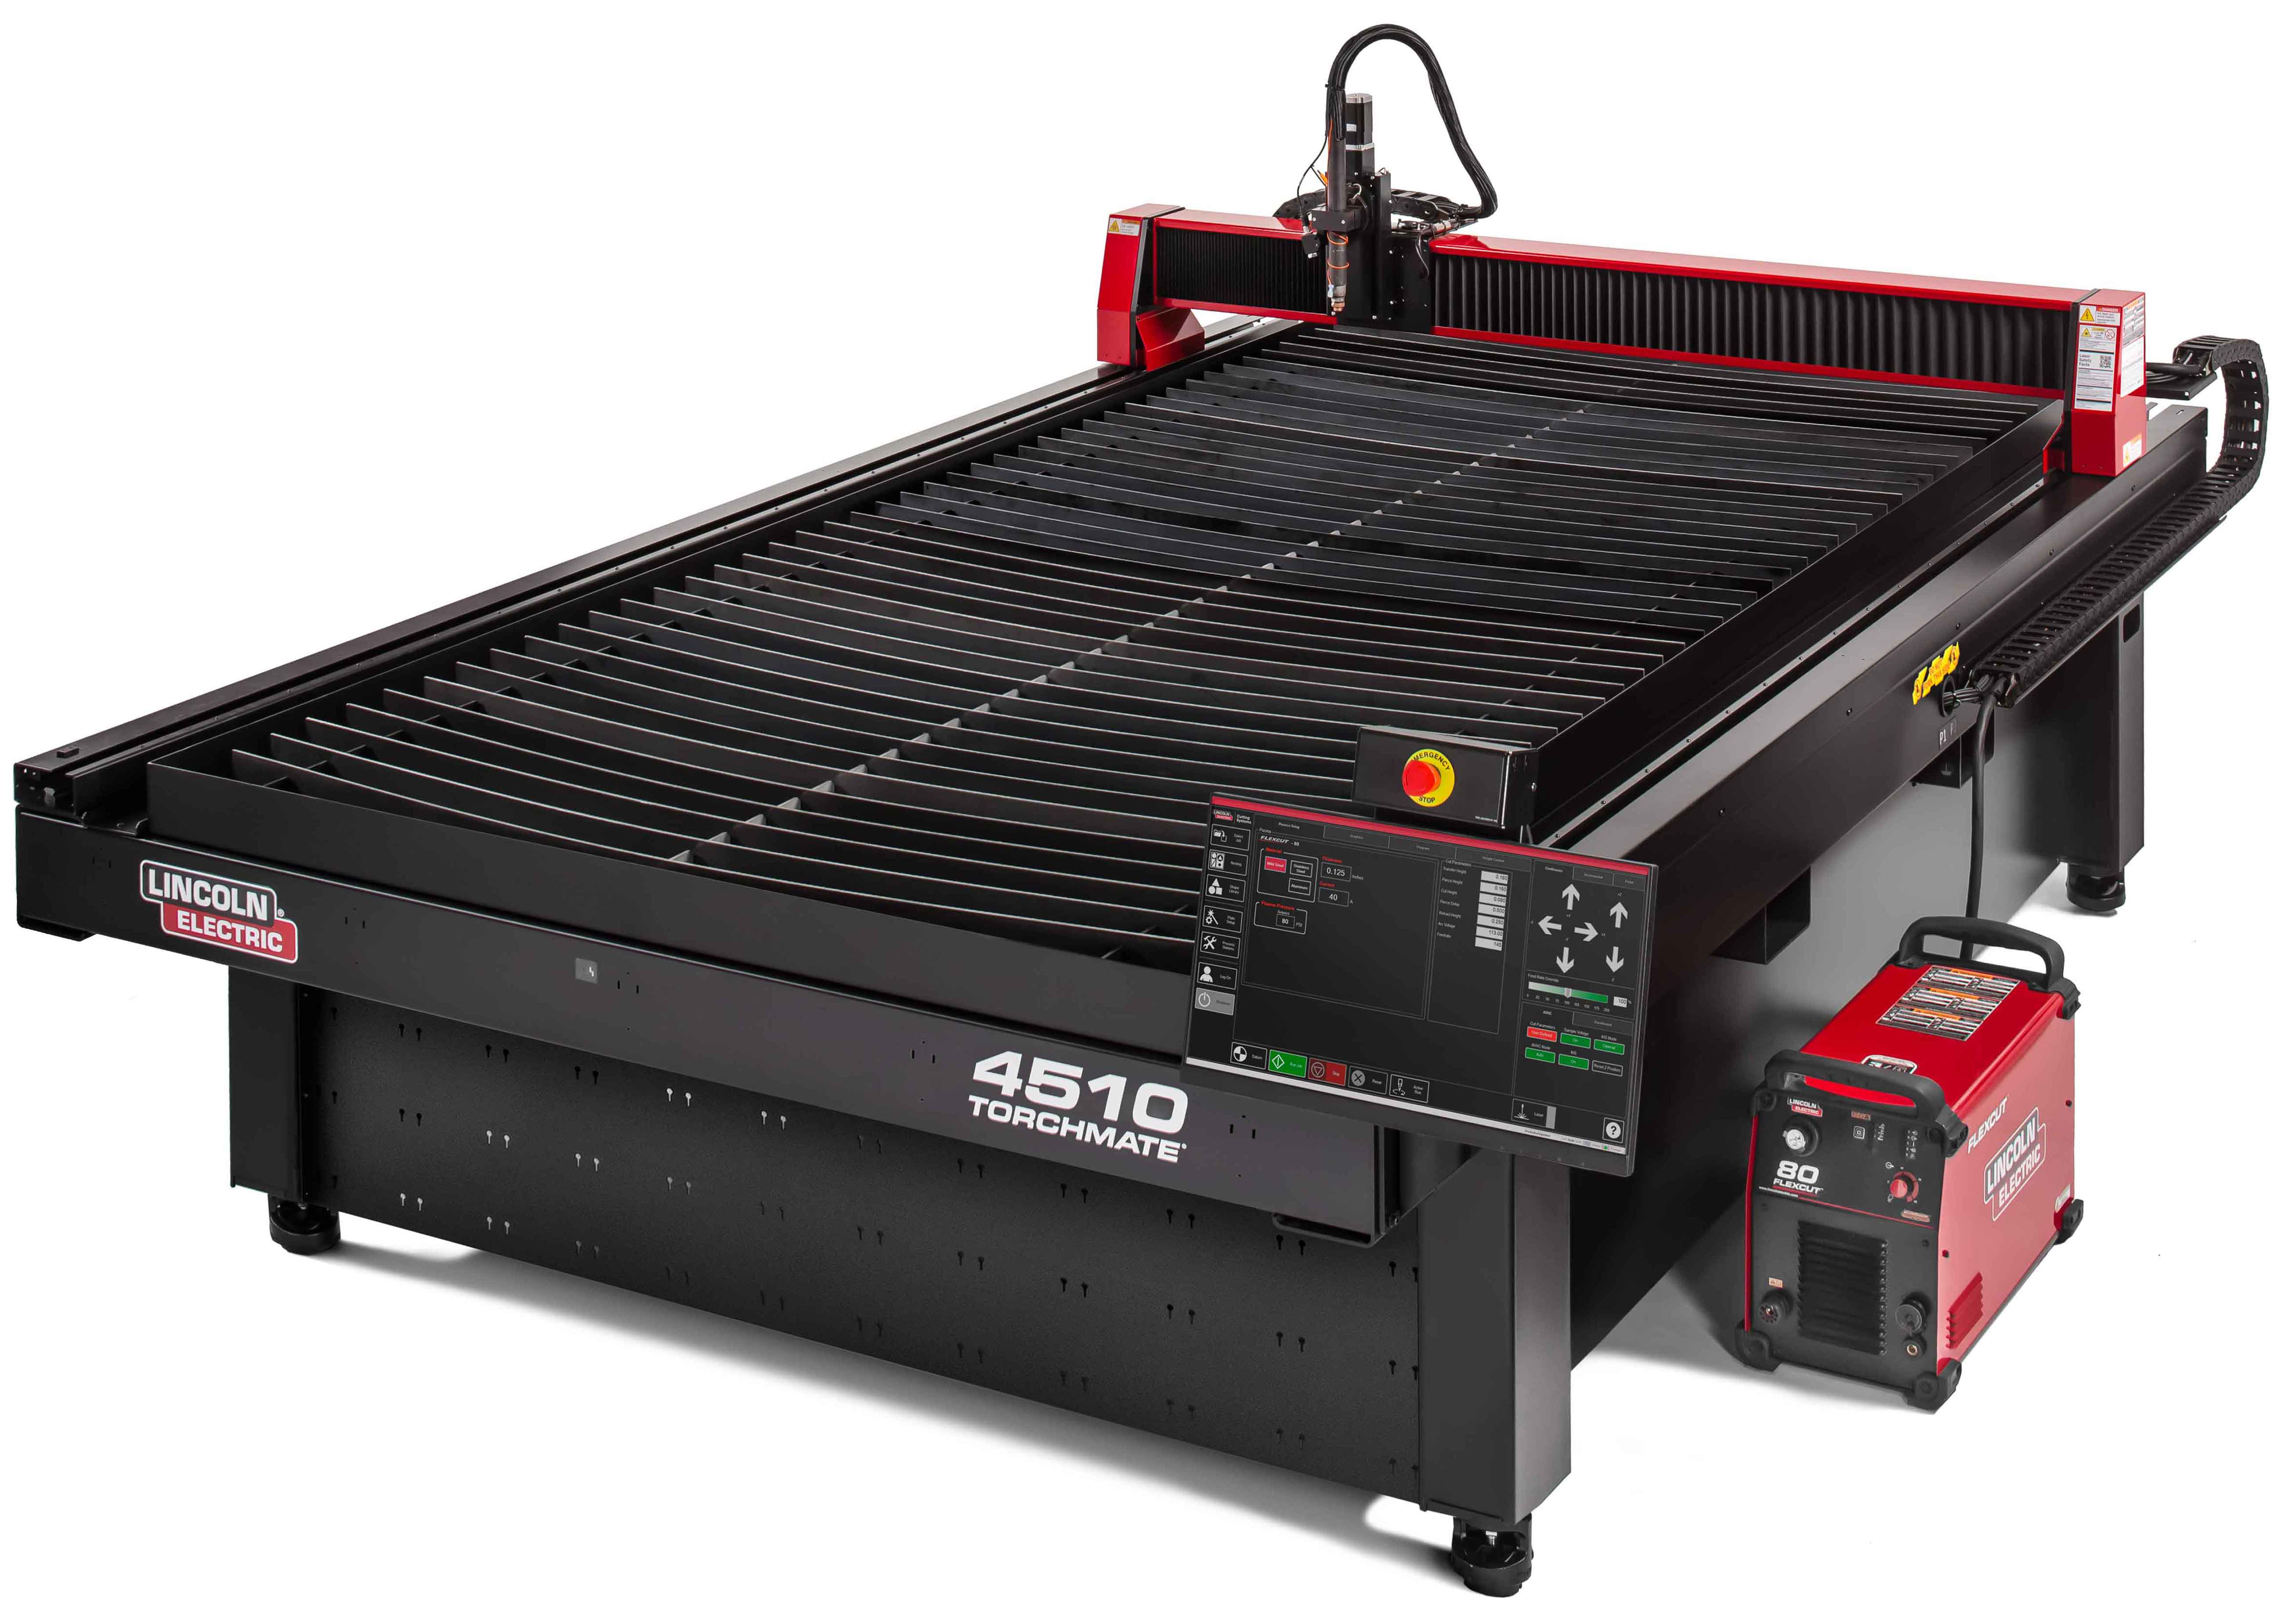 Lincoln Electric Torchmate 4510 CNC Plasma Cutting Tables